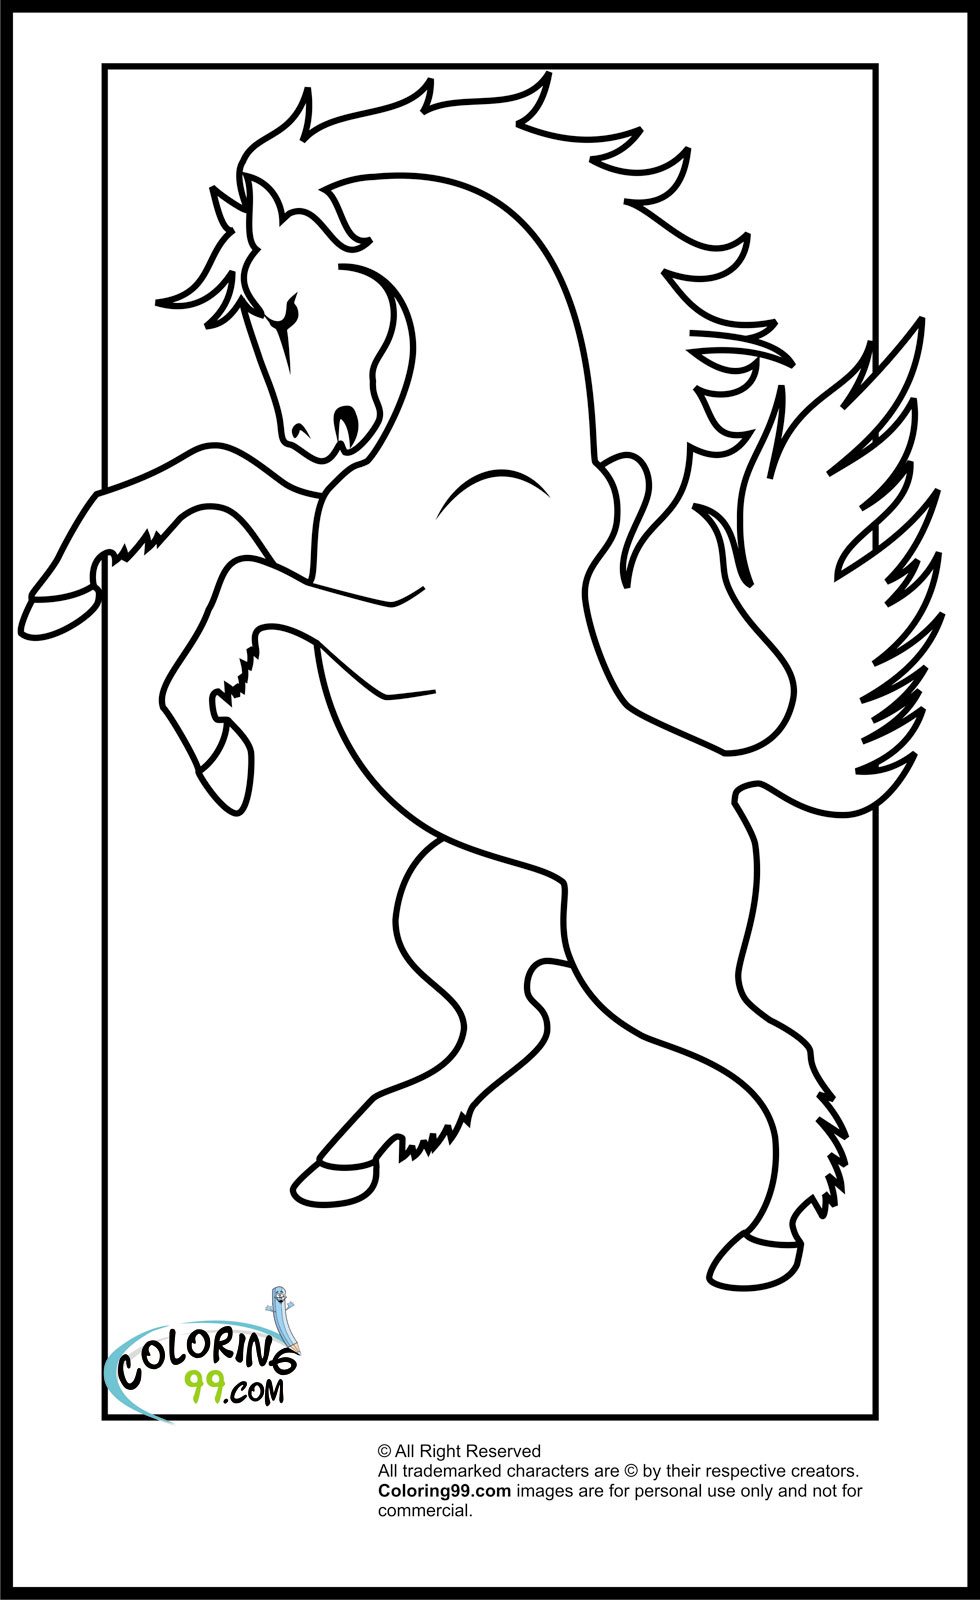 Download Horse Coloring Pages | Team colors